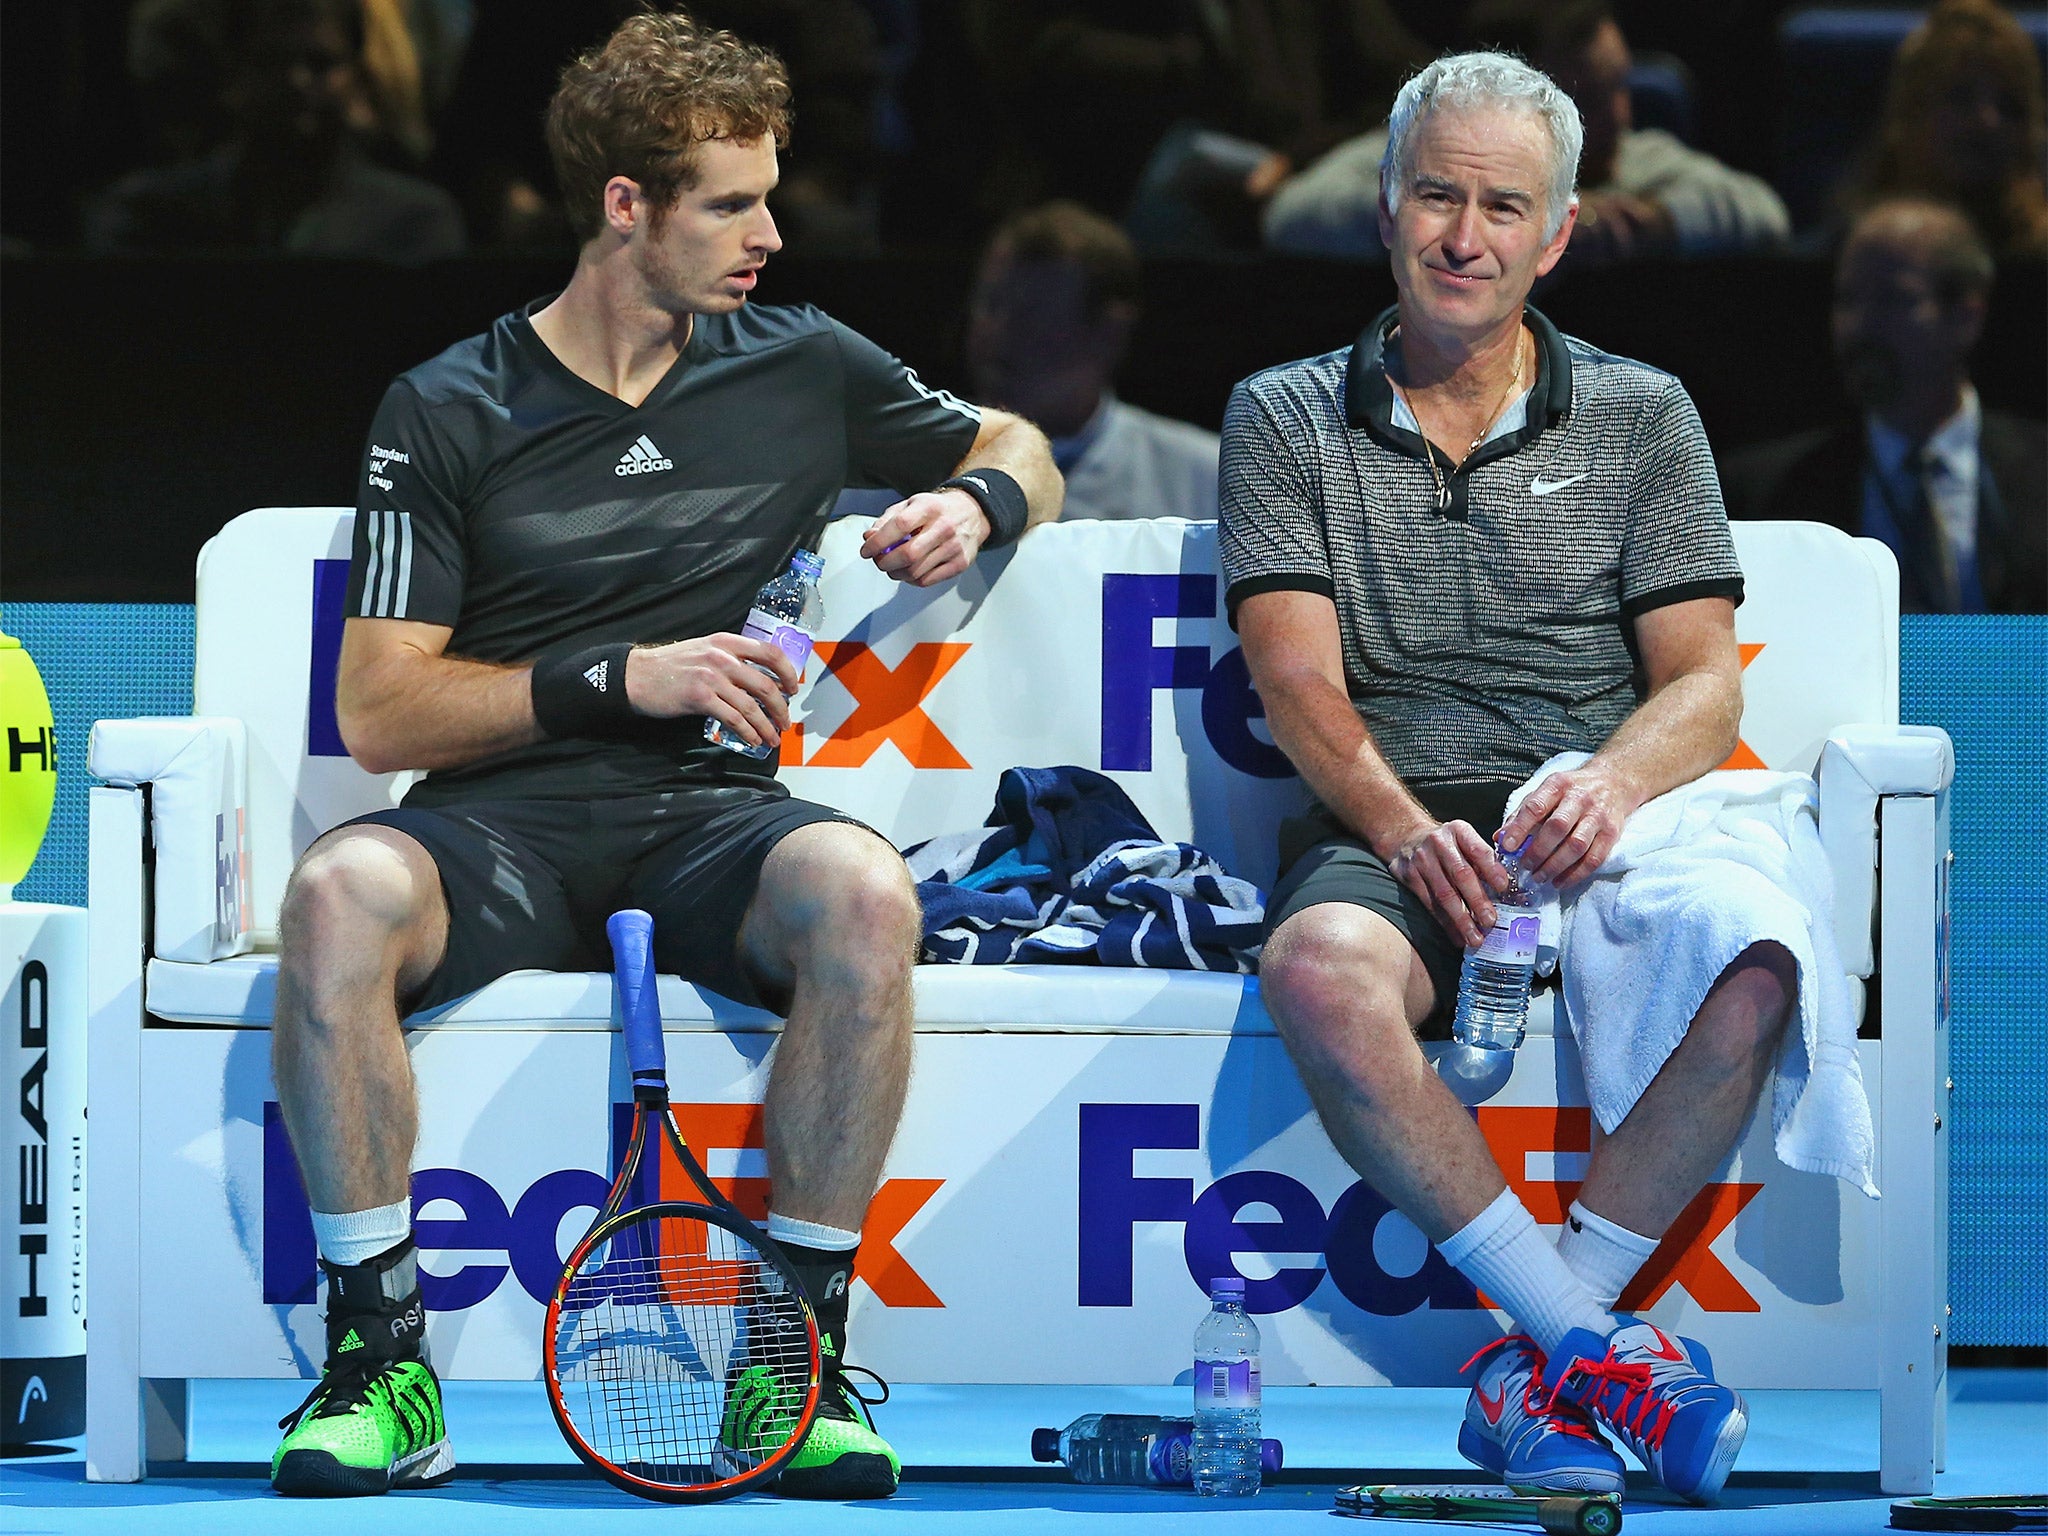 John McEnroe believes Andy Murray should use his skills at the net more often in matches